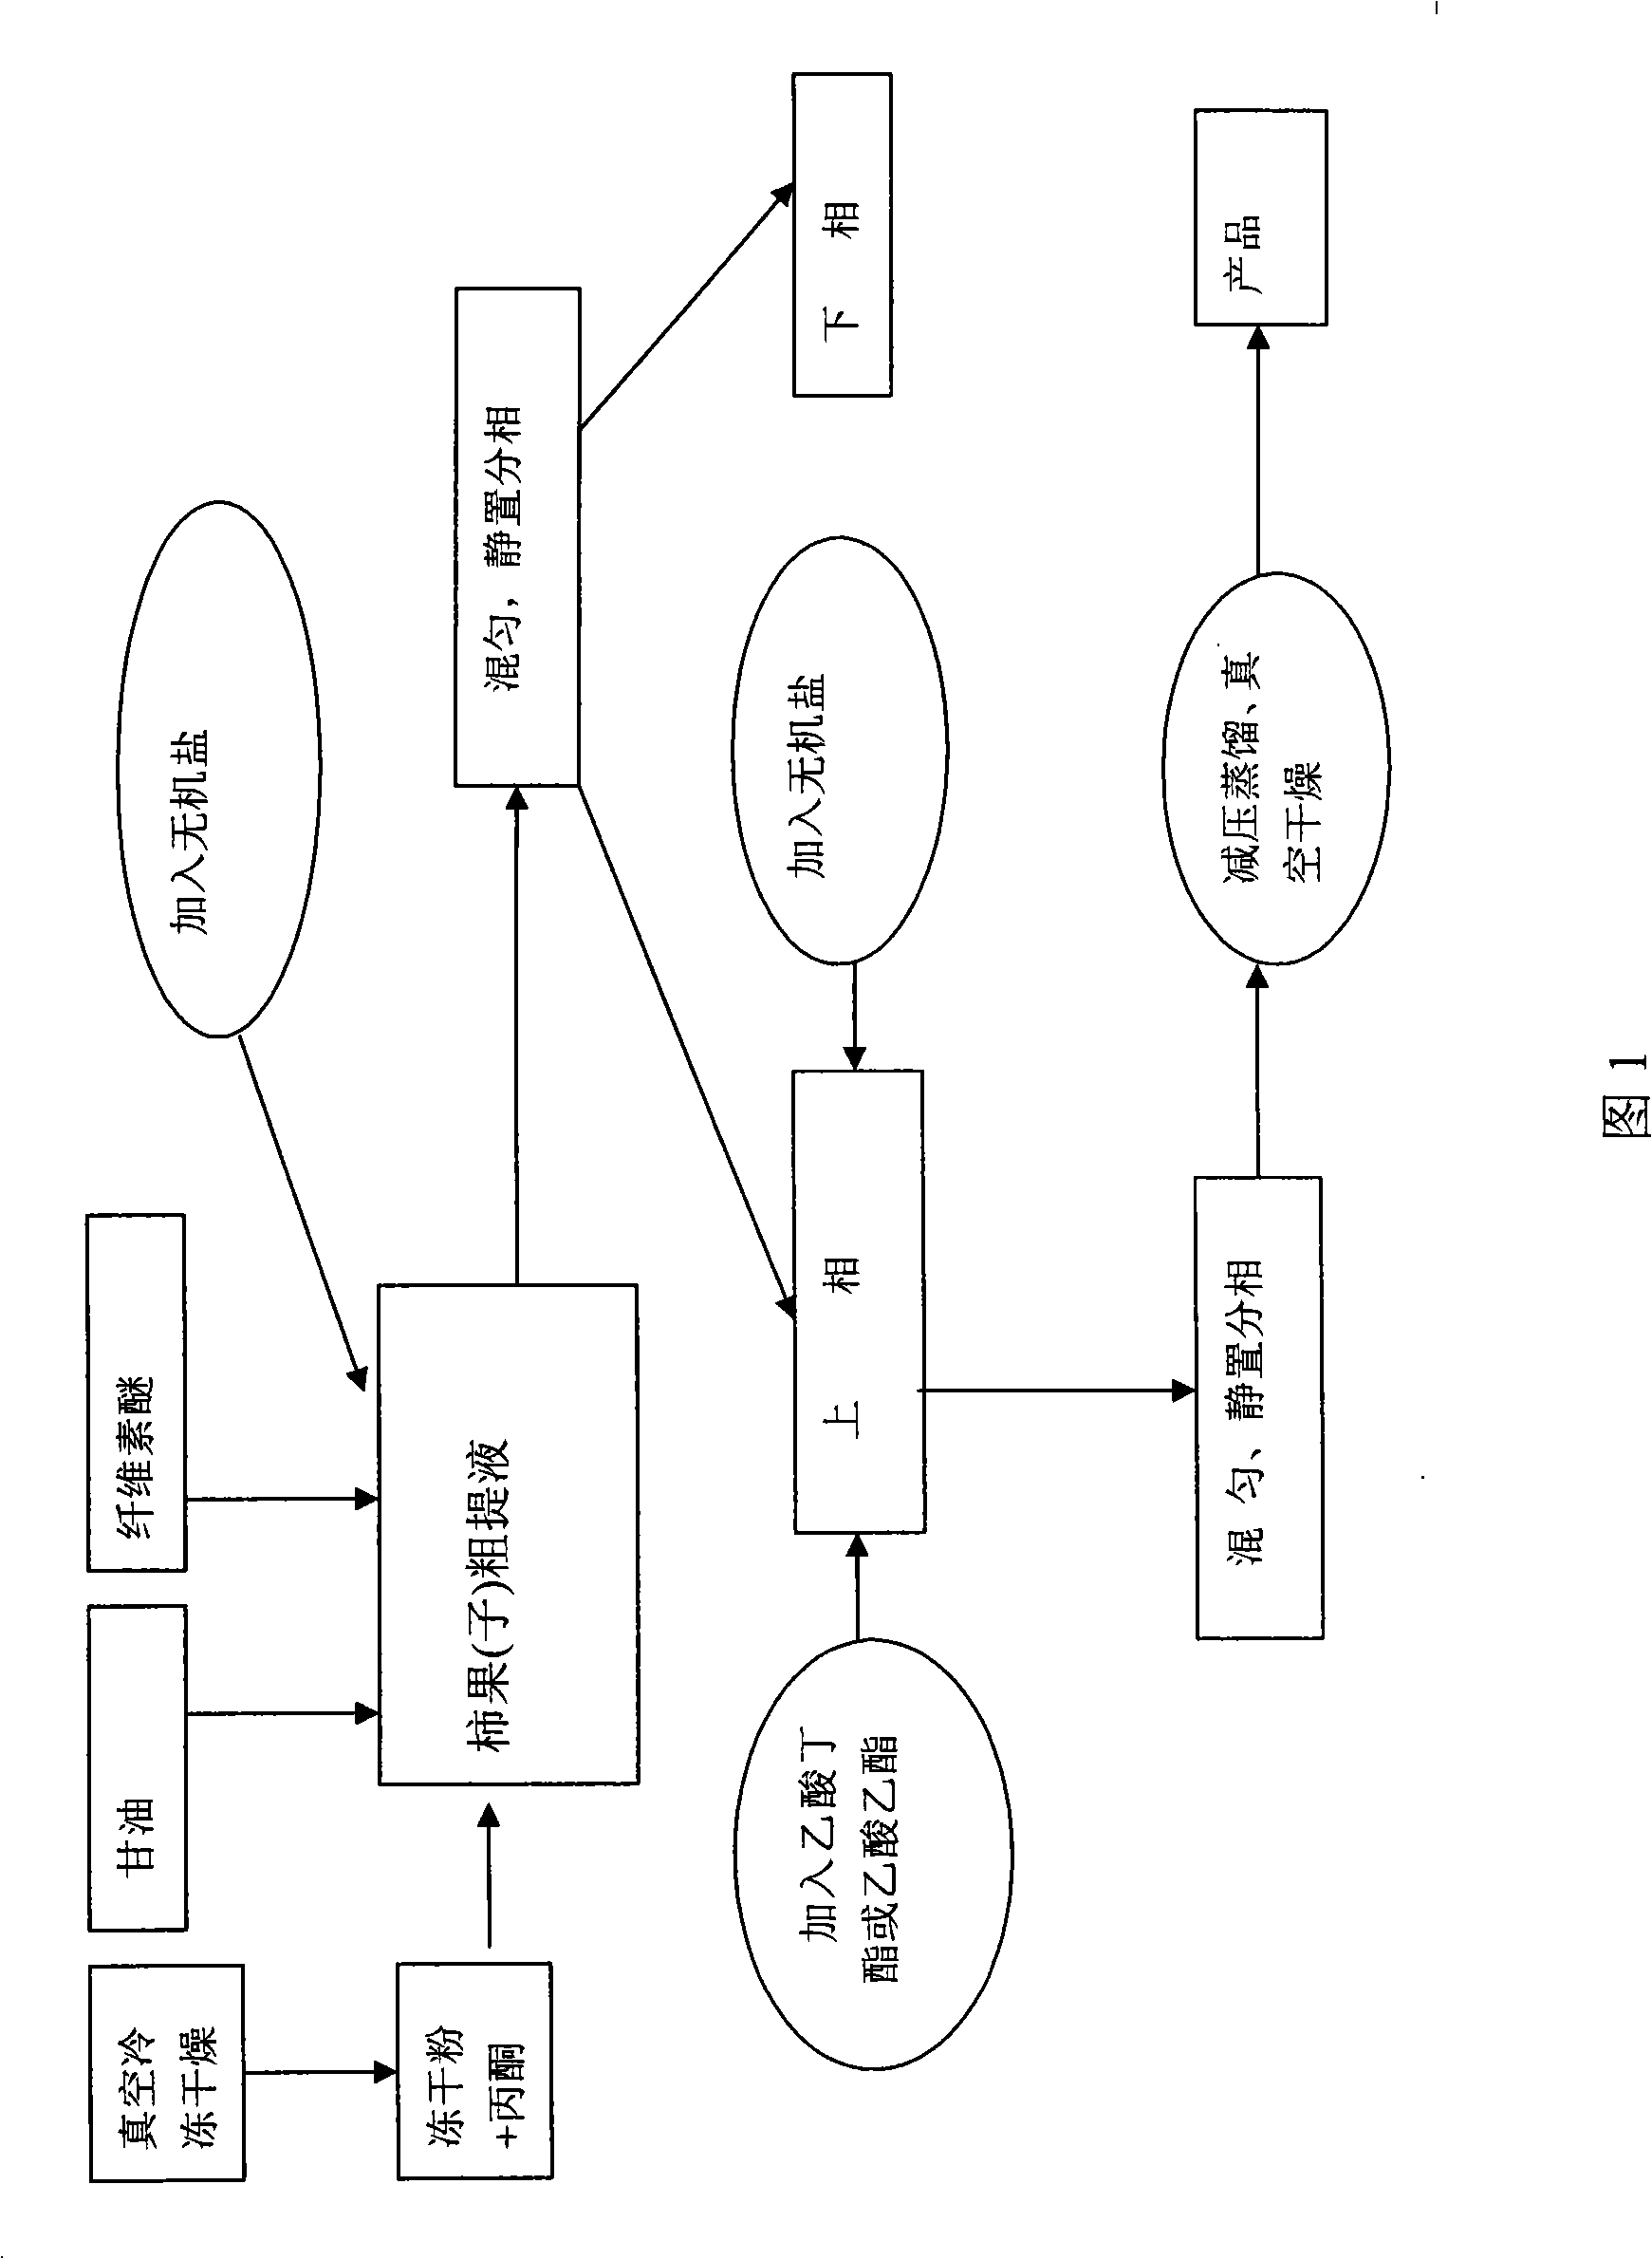 Process for double-aqueous-phase extracting and refining persimmon lycopene